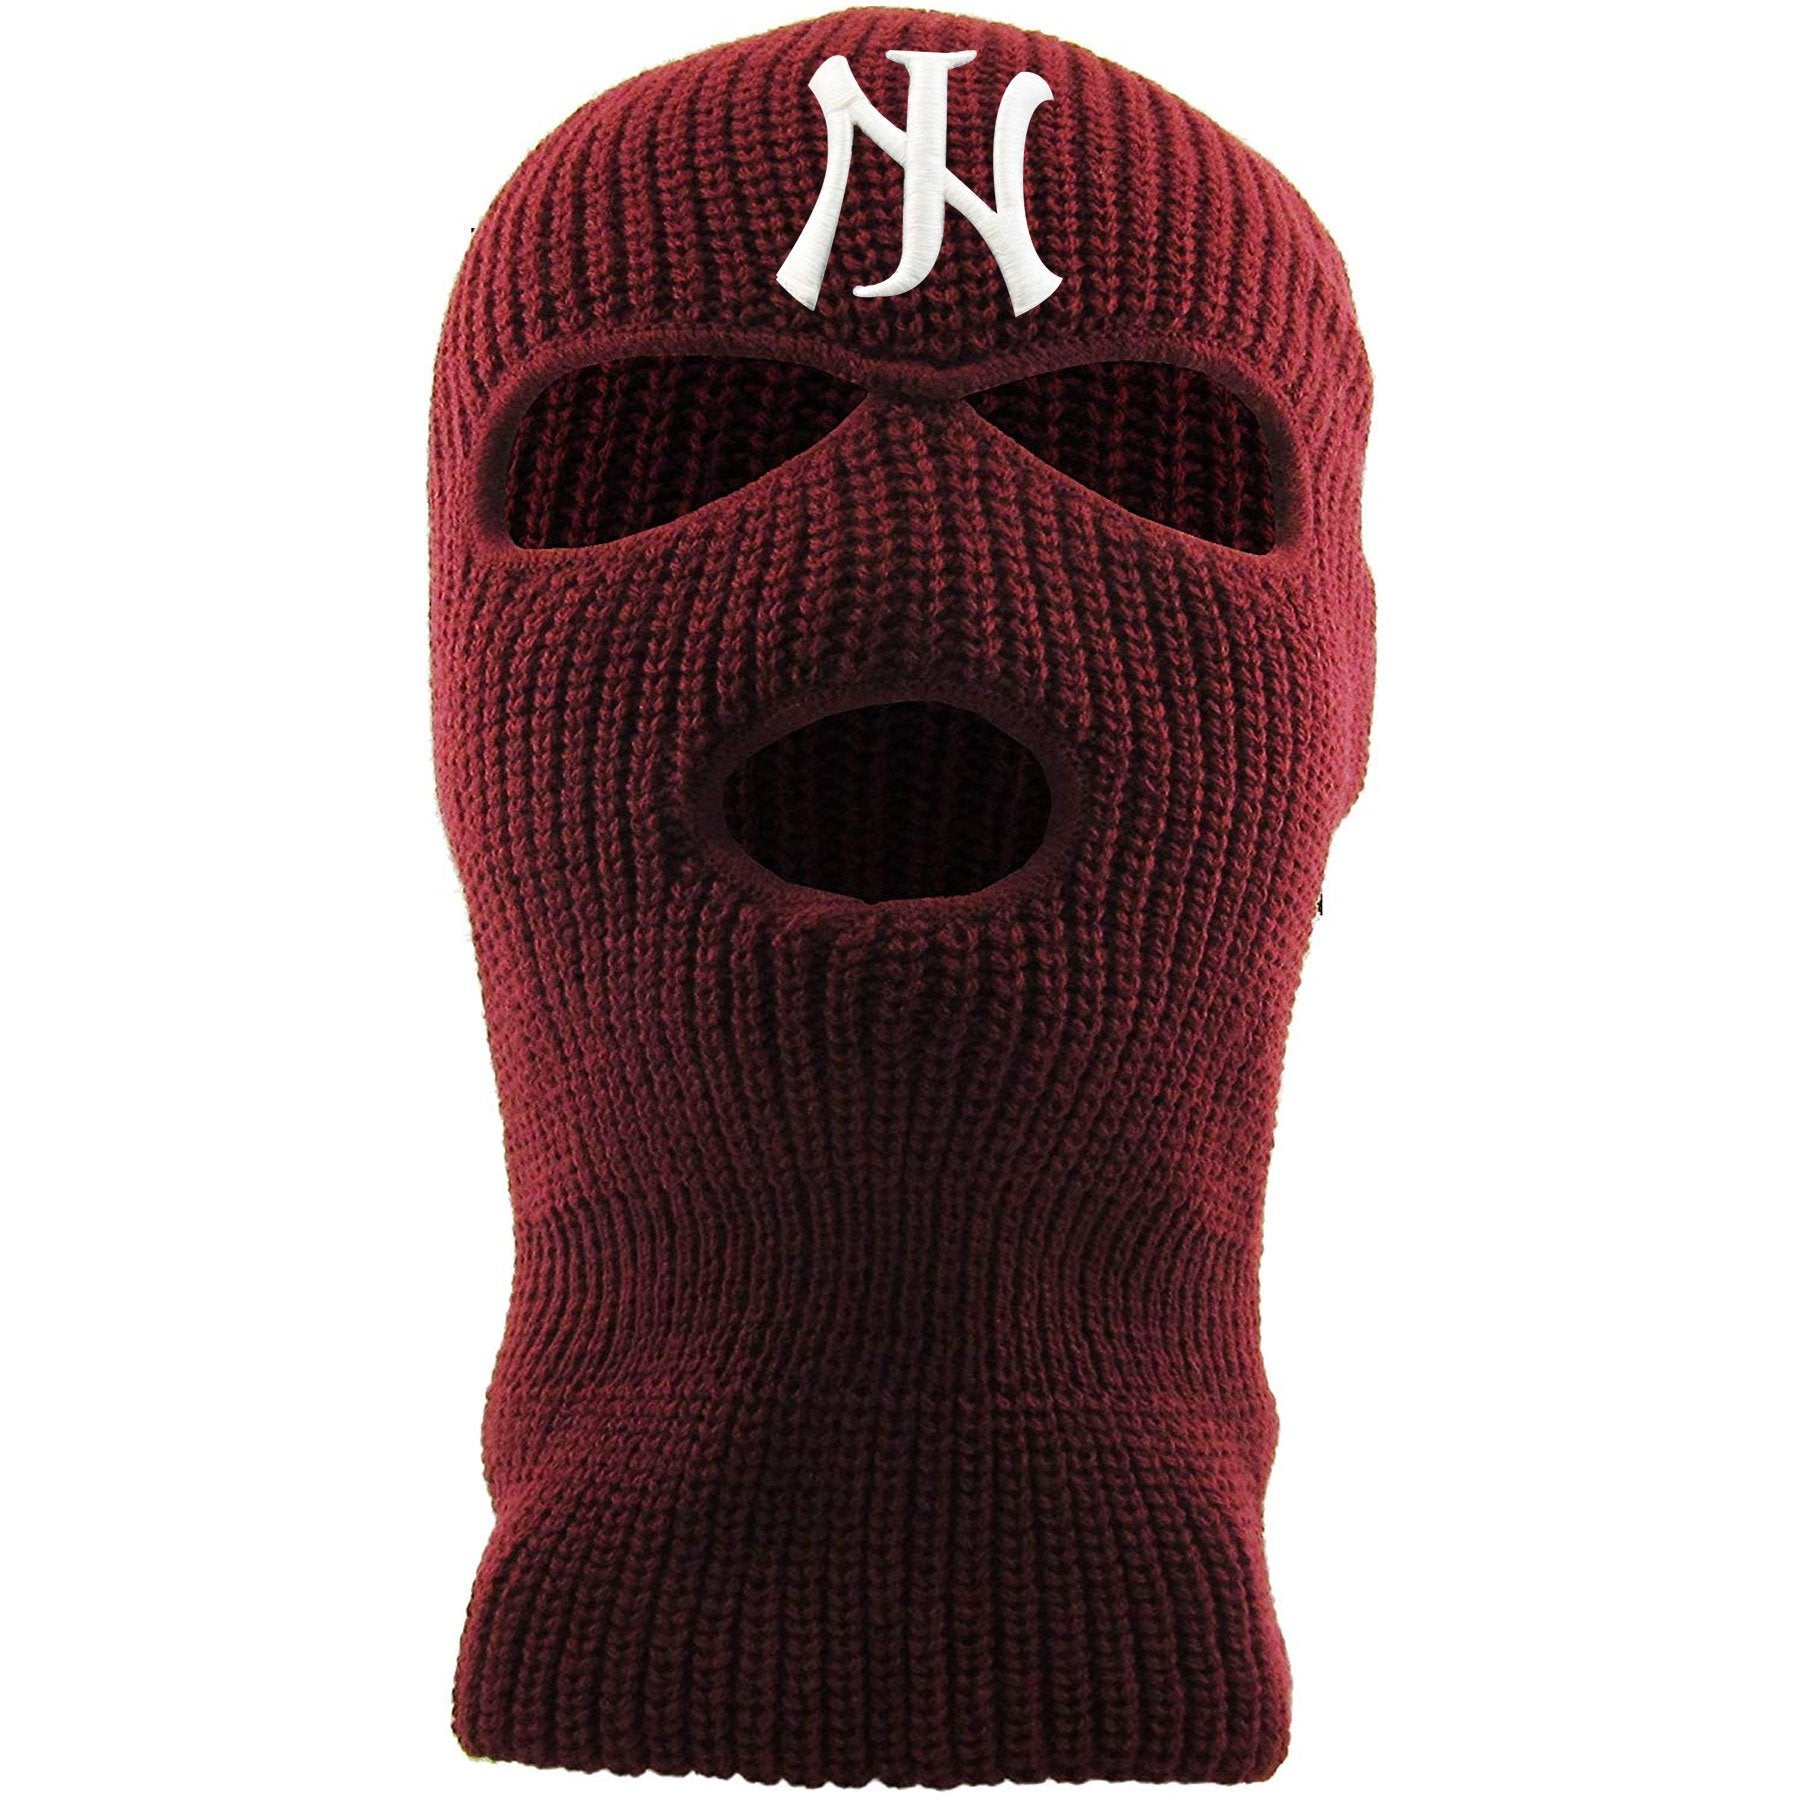 Embroidered on the forehead of the maroon new jersey ski mask is the NJ logo